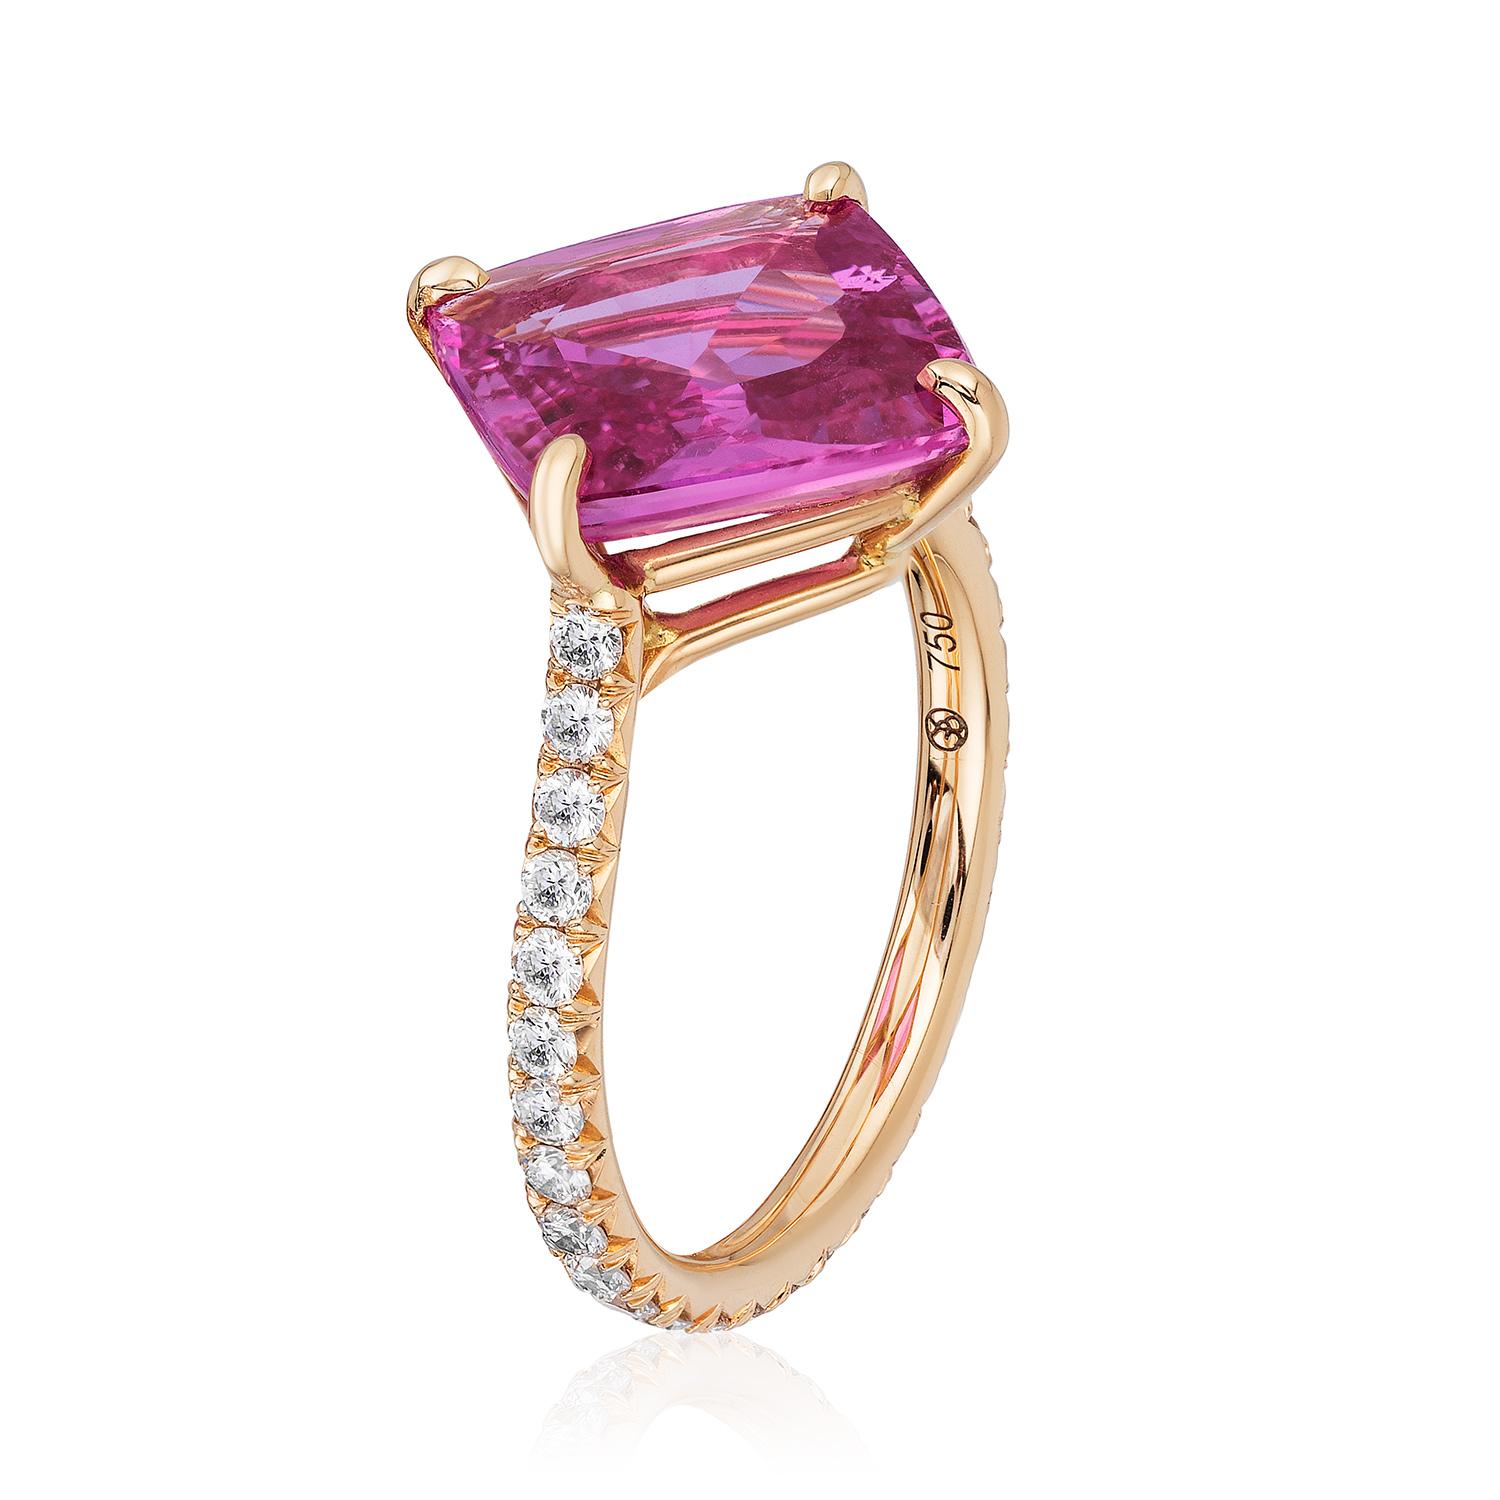 An 18kt rose-gold solitaire ring centered upon a 5.02 carat cushion pink sapphire, certified by Gubelin Gem Lab, set with colorless diamond micropavé on the shank. Total diamond weight 0.54 carats.

Finding the right melange of colors is the skill